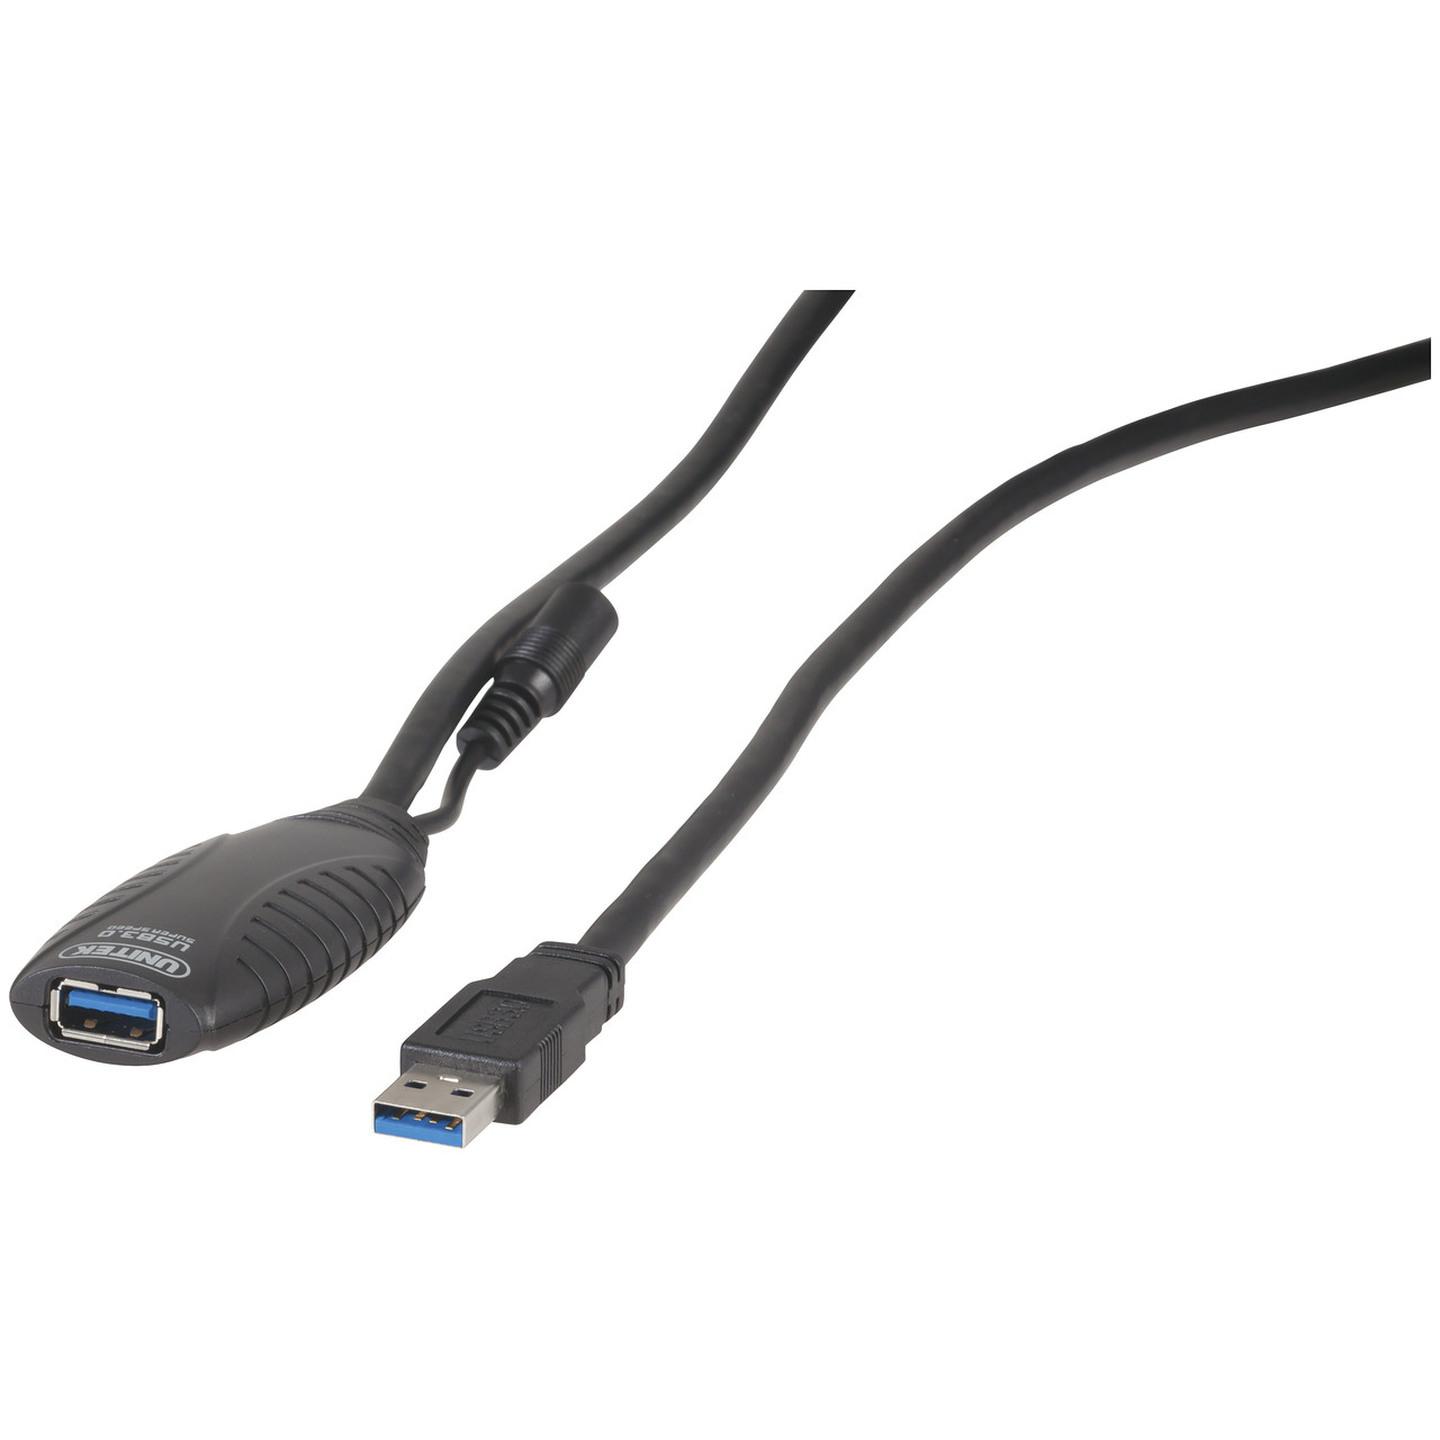 Active USB 3.0 Extension Cable 10m